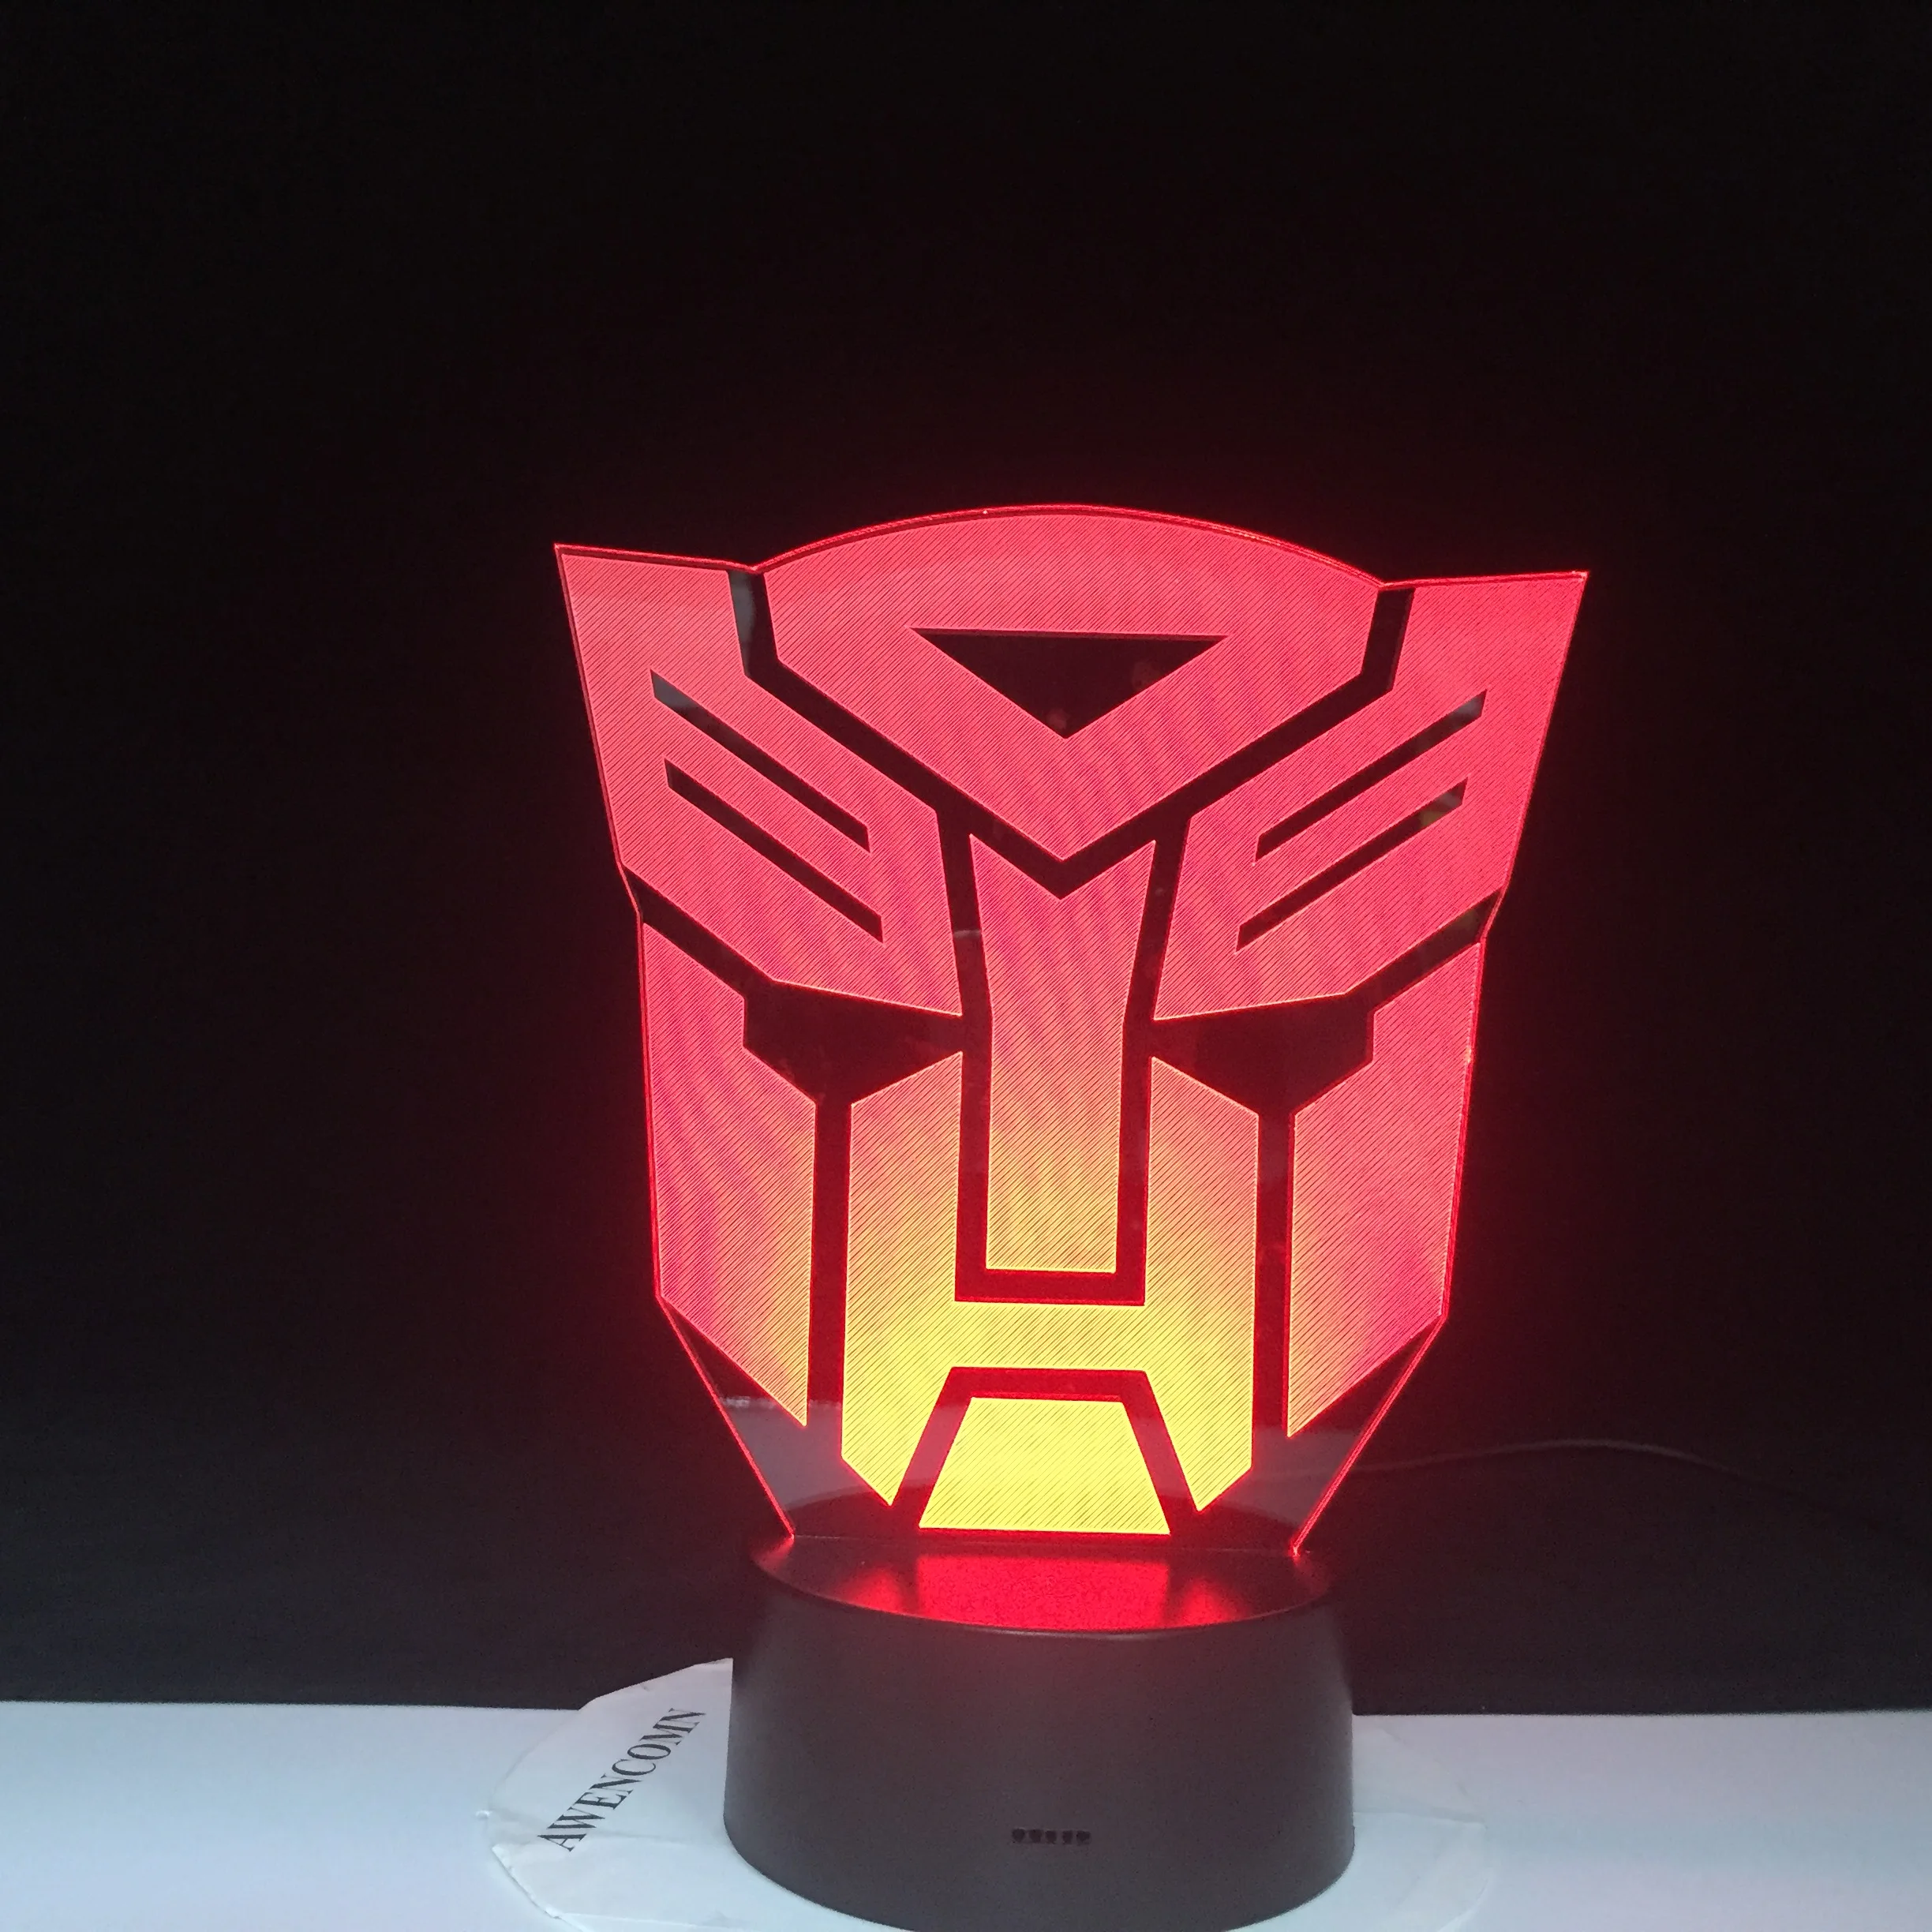 Details about   Transformers 3D illusion LED Lamp Touch Switch Table Desk Night Light Kids Gift 